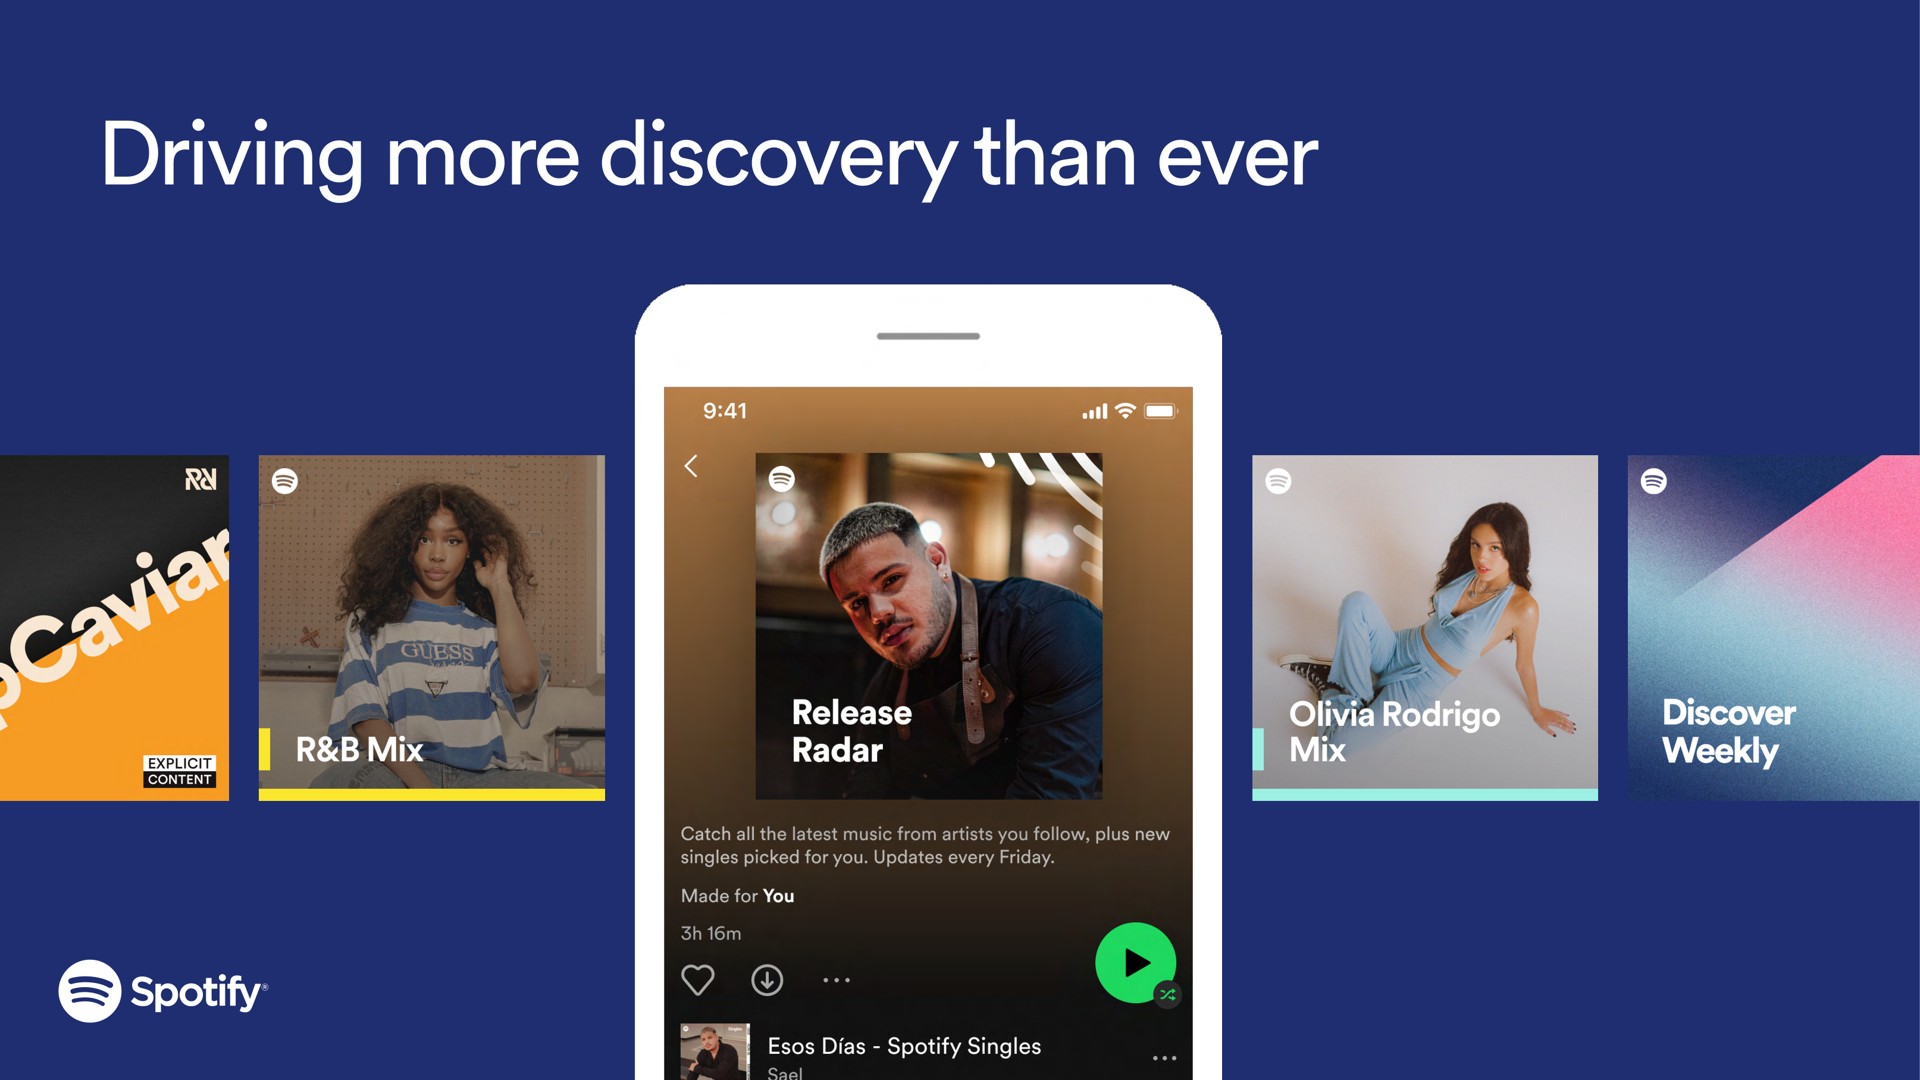 driving more discovery than ever | Spotify